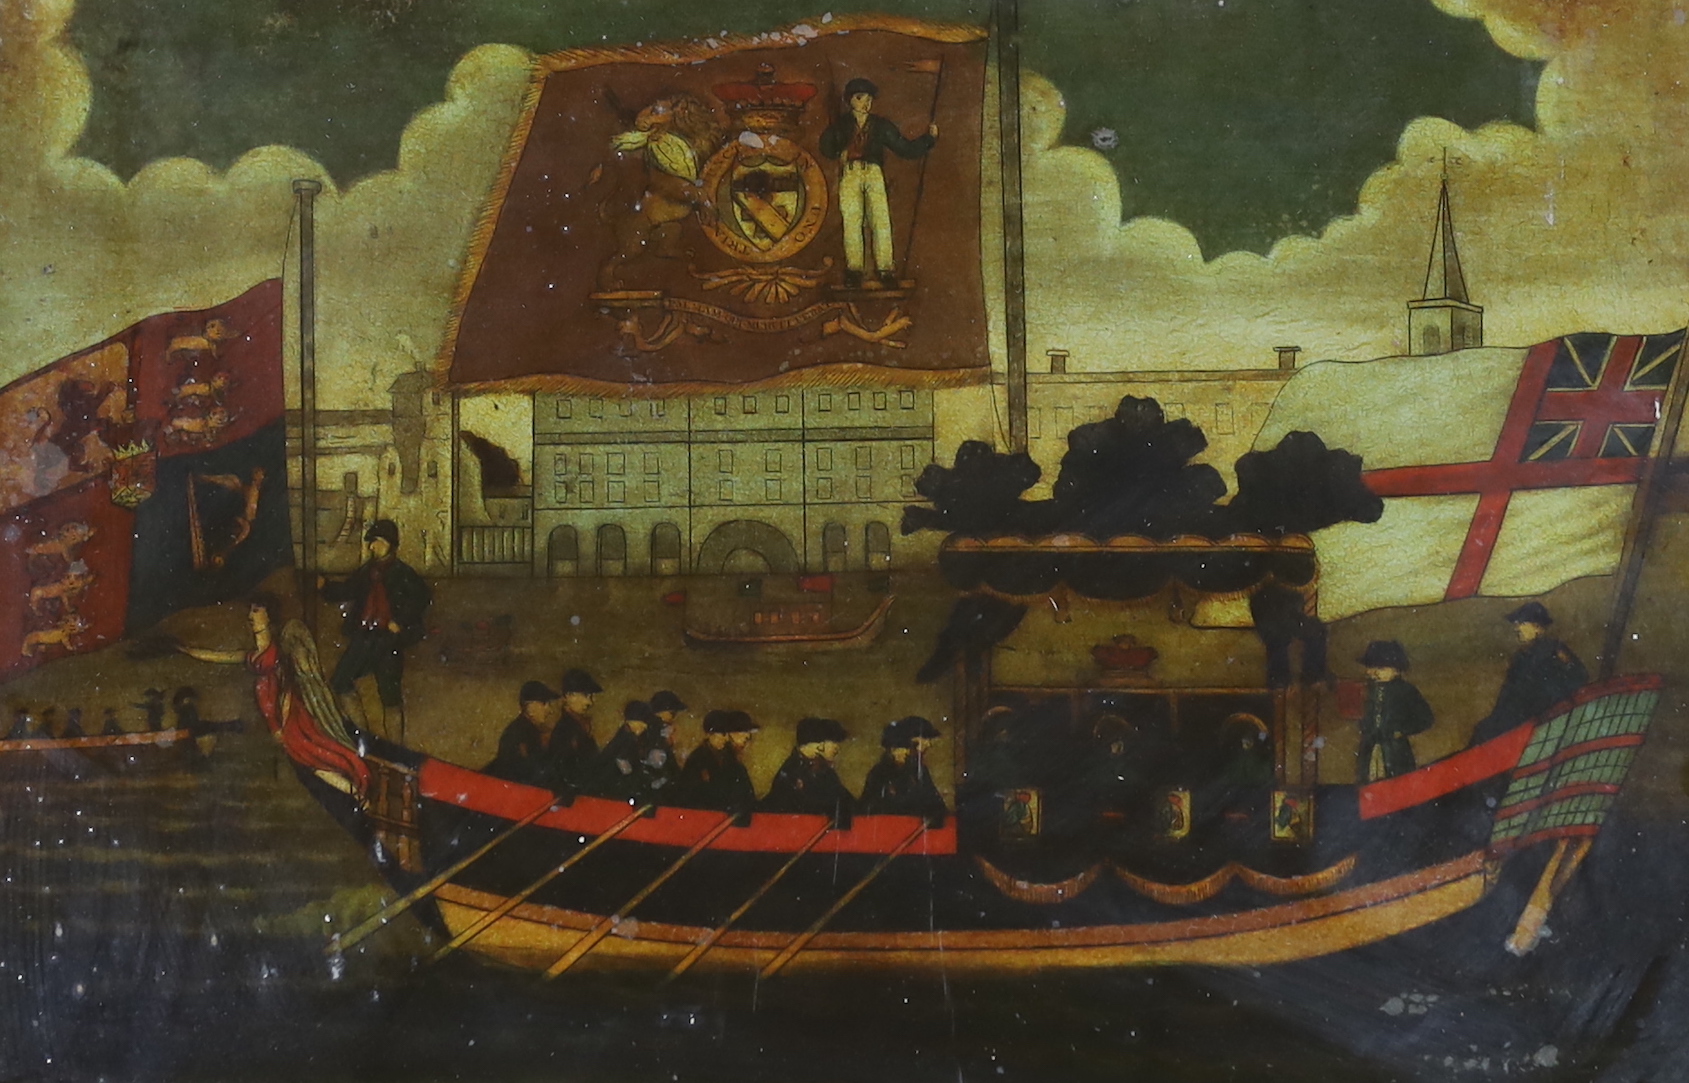 A 19th century commemorative reverse glass print, Lord Nelson's funeral barge from Greenwich to Whitehall, 26 x 36cm